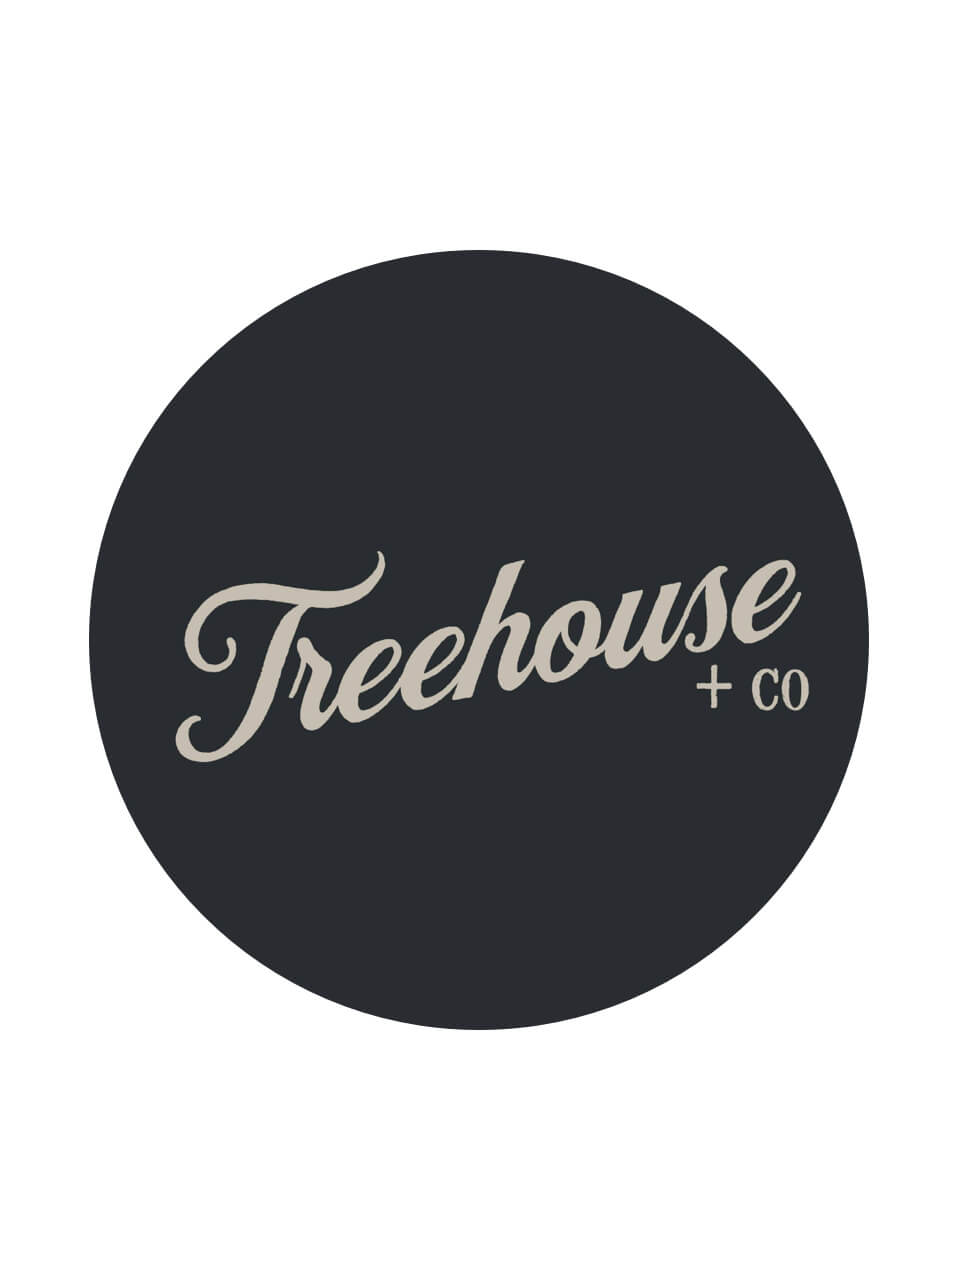 treehouse-and-co-logo-feature-thumb